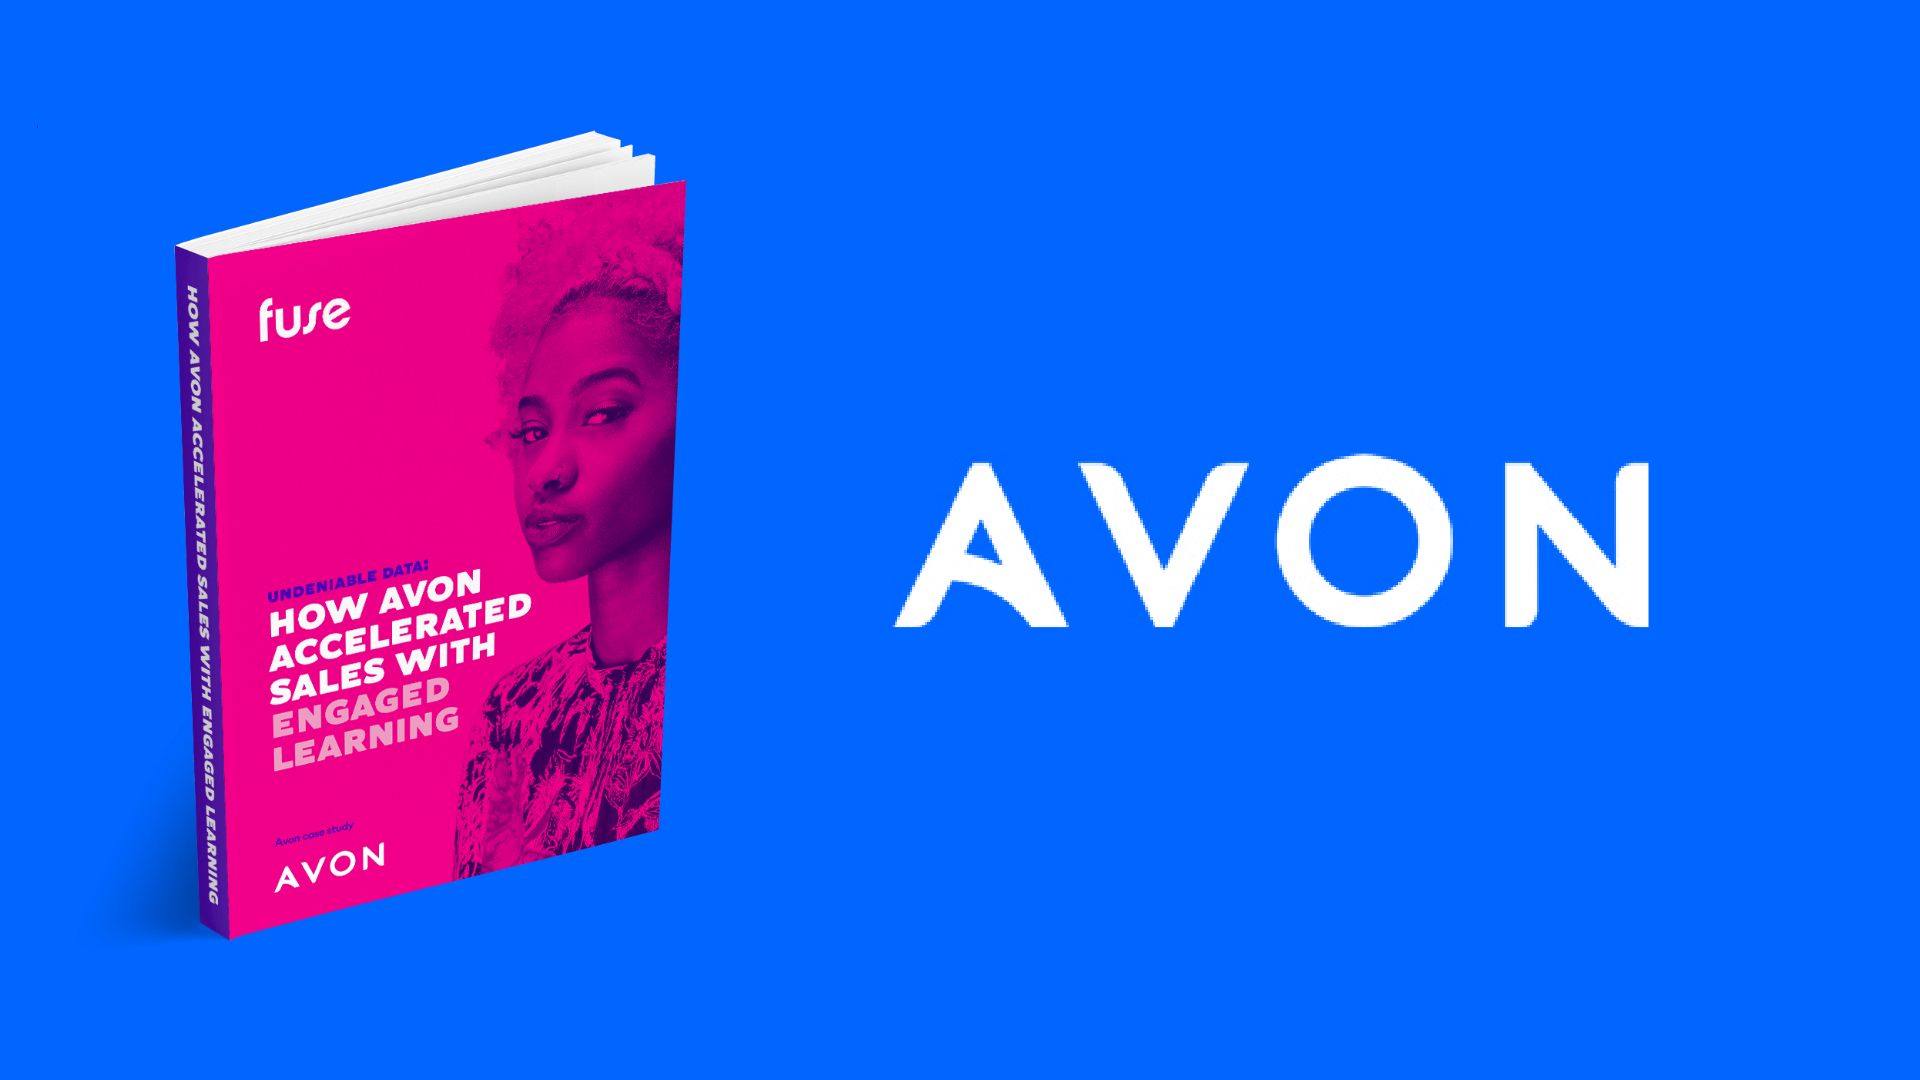 How Avon Accelerated Sales With Engaged Learning